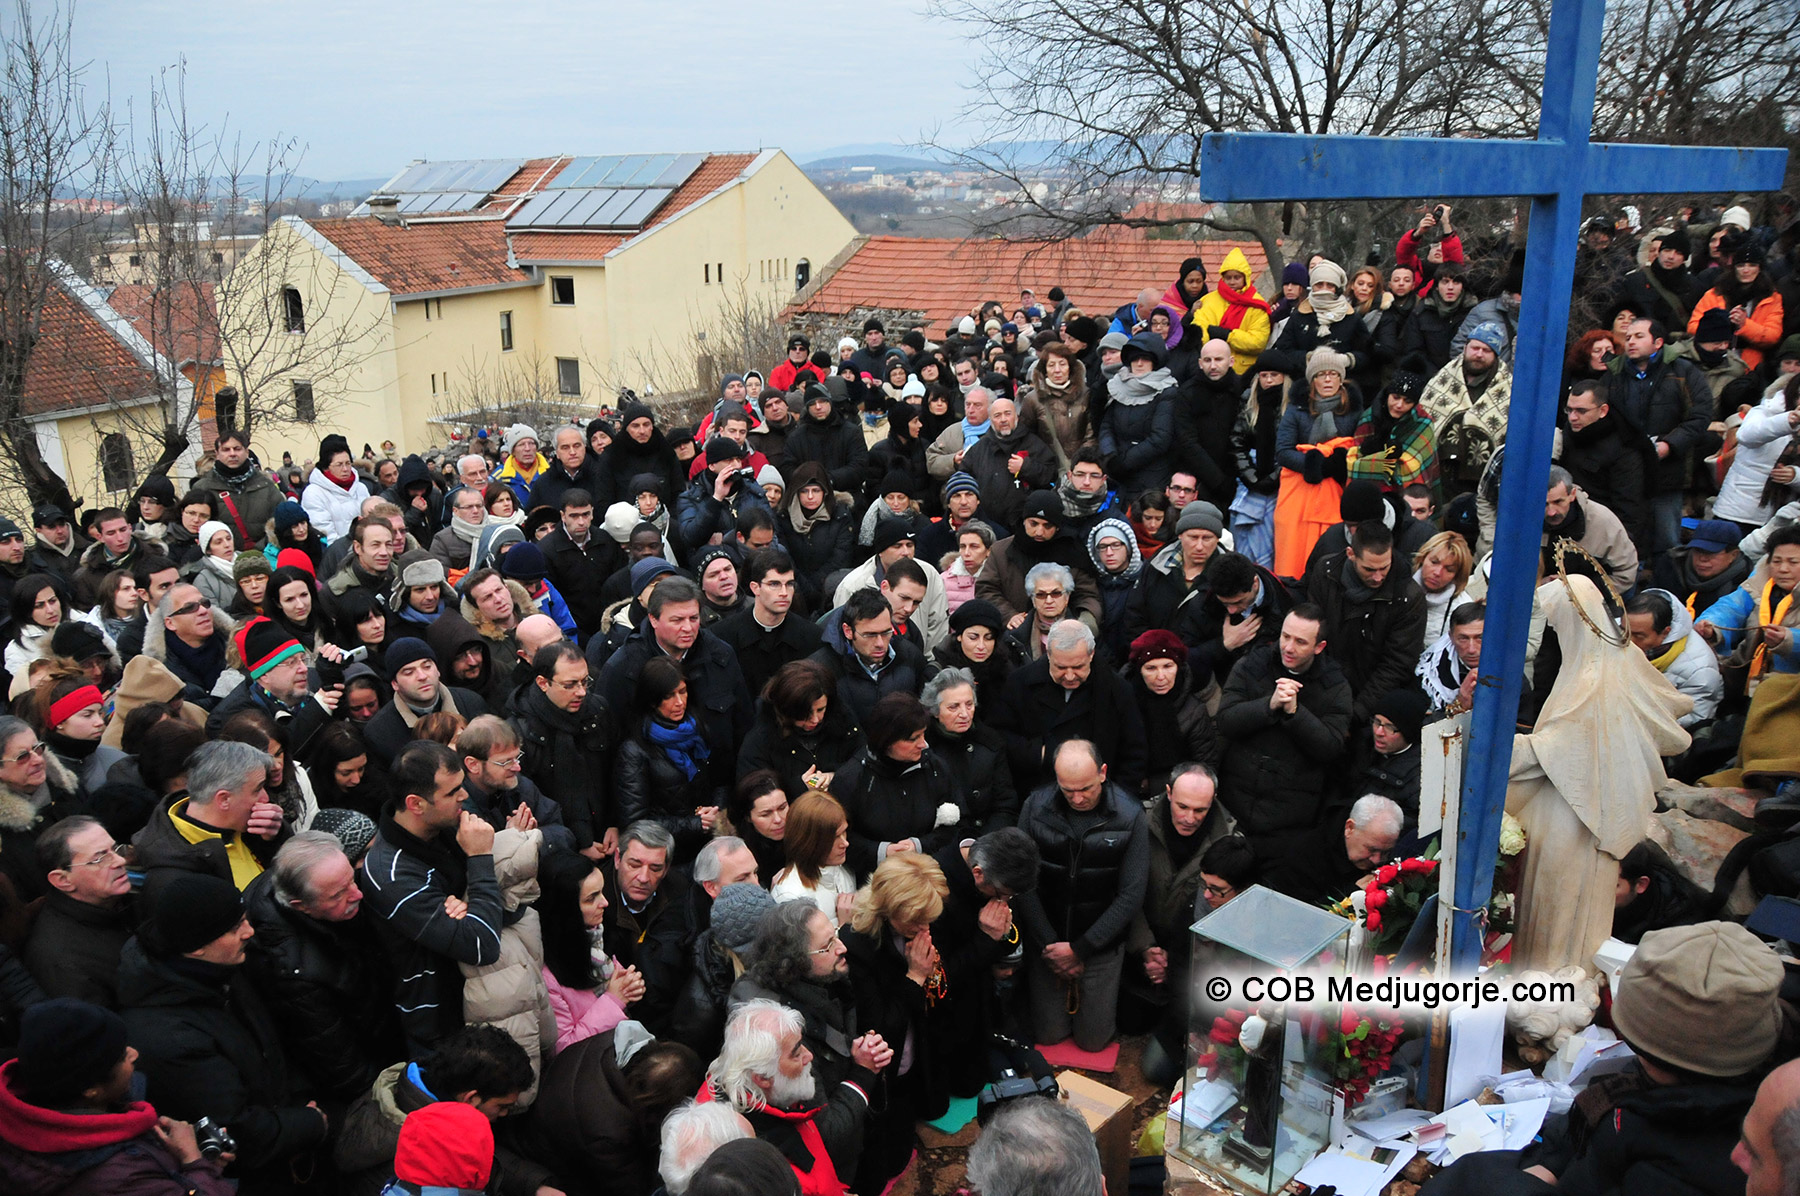 Crowd gathered for apparition january 2, 2011